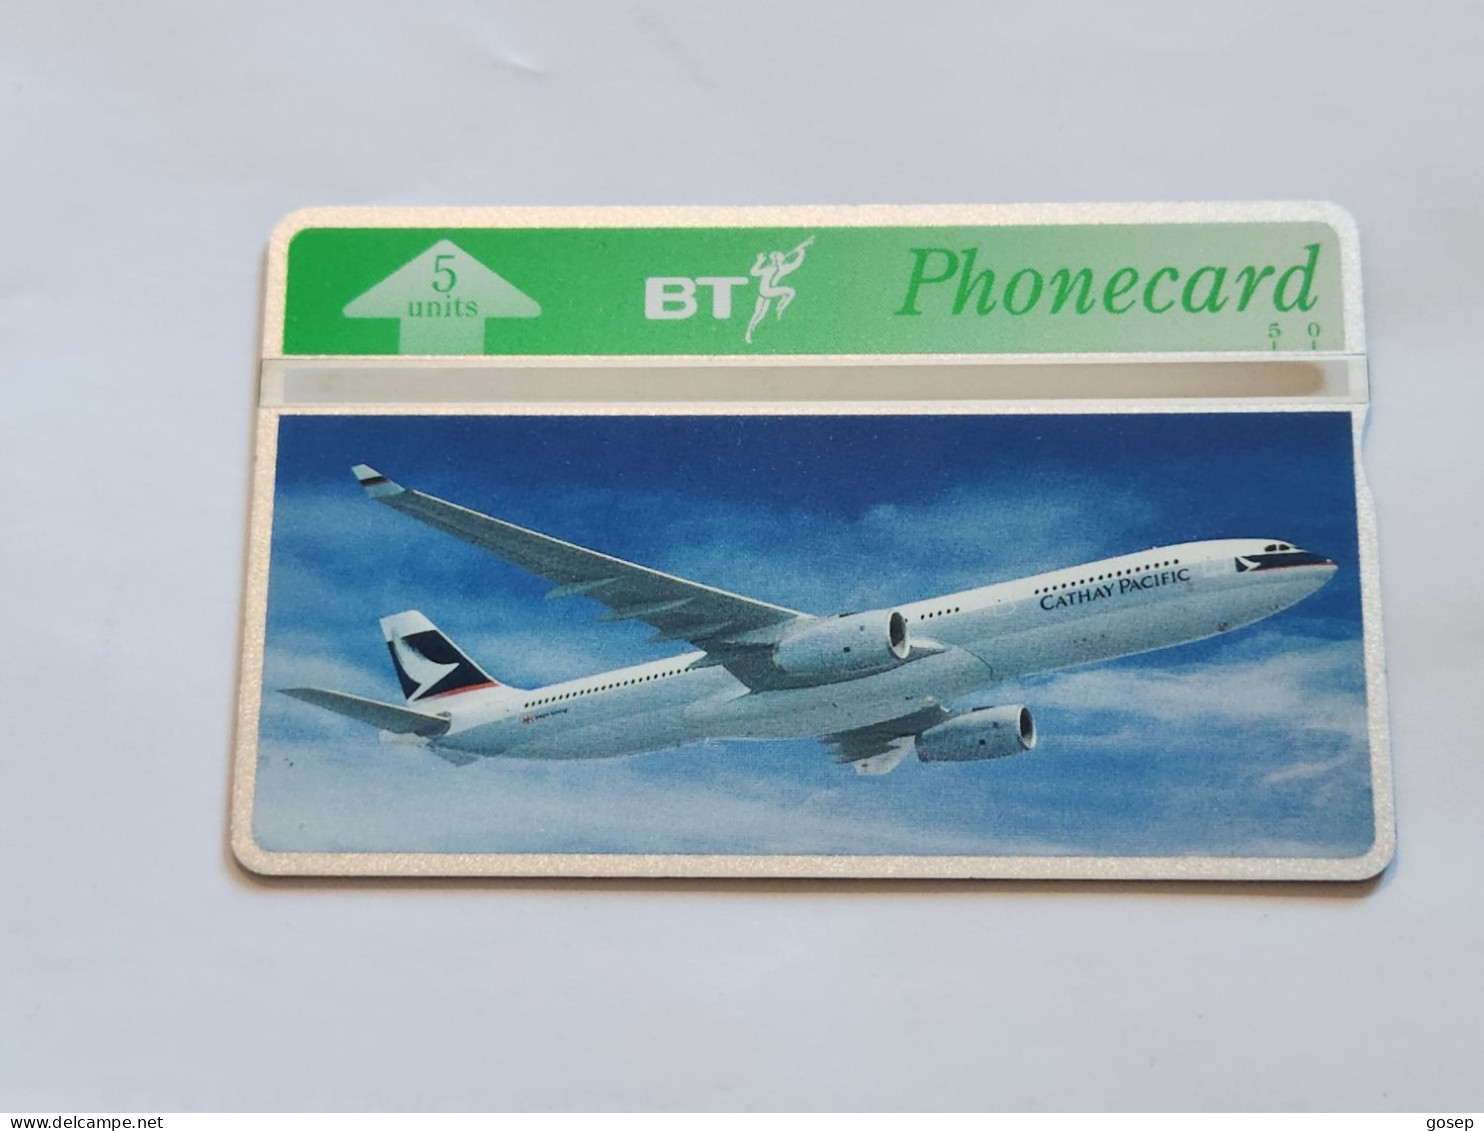 United Kingdom-(BTG-441)-Cathay Pacific-(379)(5units)(405K41020)(tirage-1.000)-price Cataloge-10.00£-mint - BT General Issues